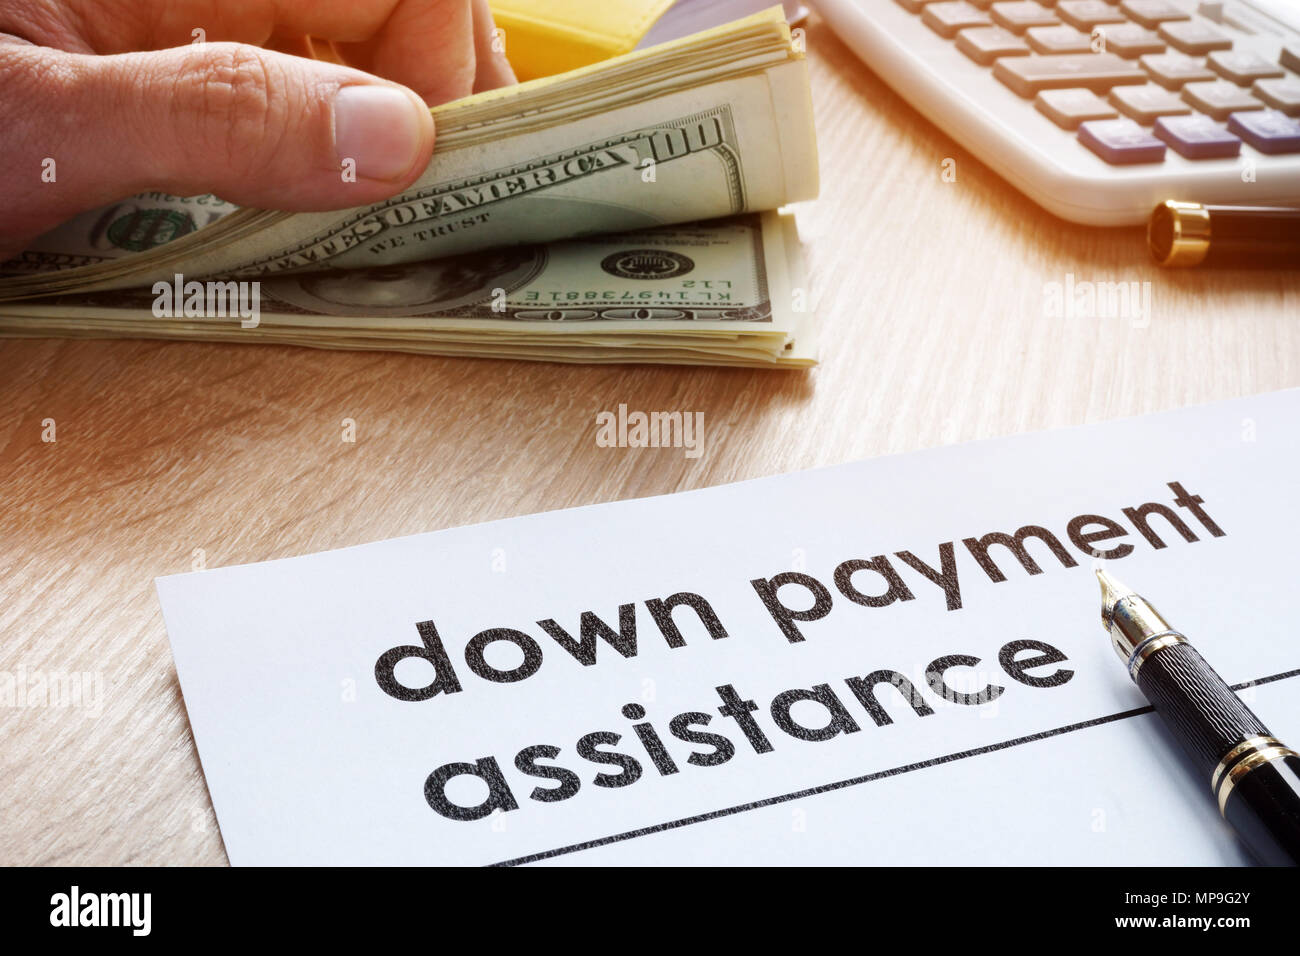 Down payment assistance form and dollar banknotes. Stock Photo